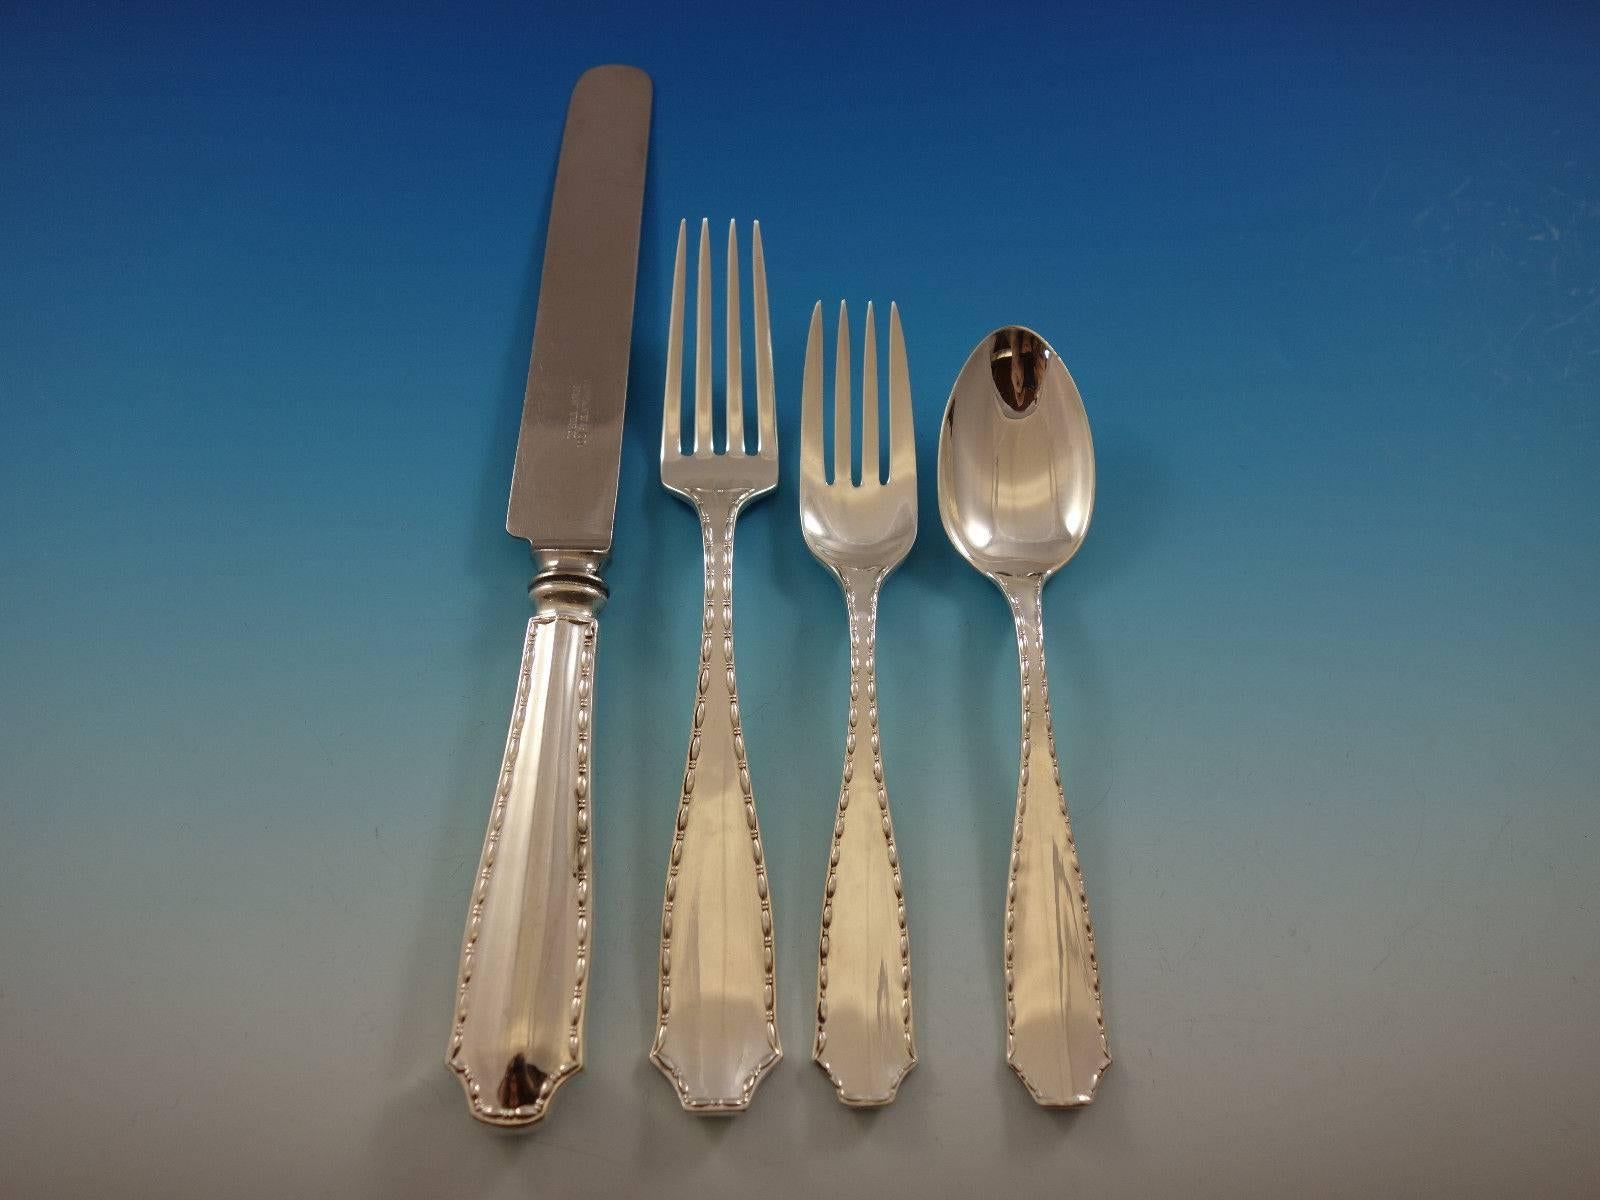 Marquise by Tiffany and Co. sterling silver flatware set - 89 pieces. This set includes: 

12 knives, 9 1/4